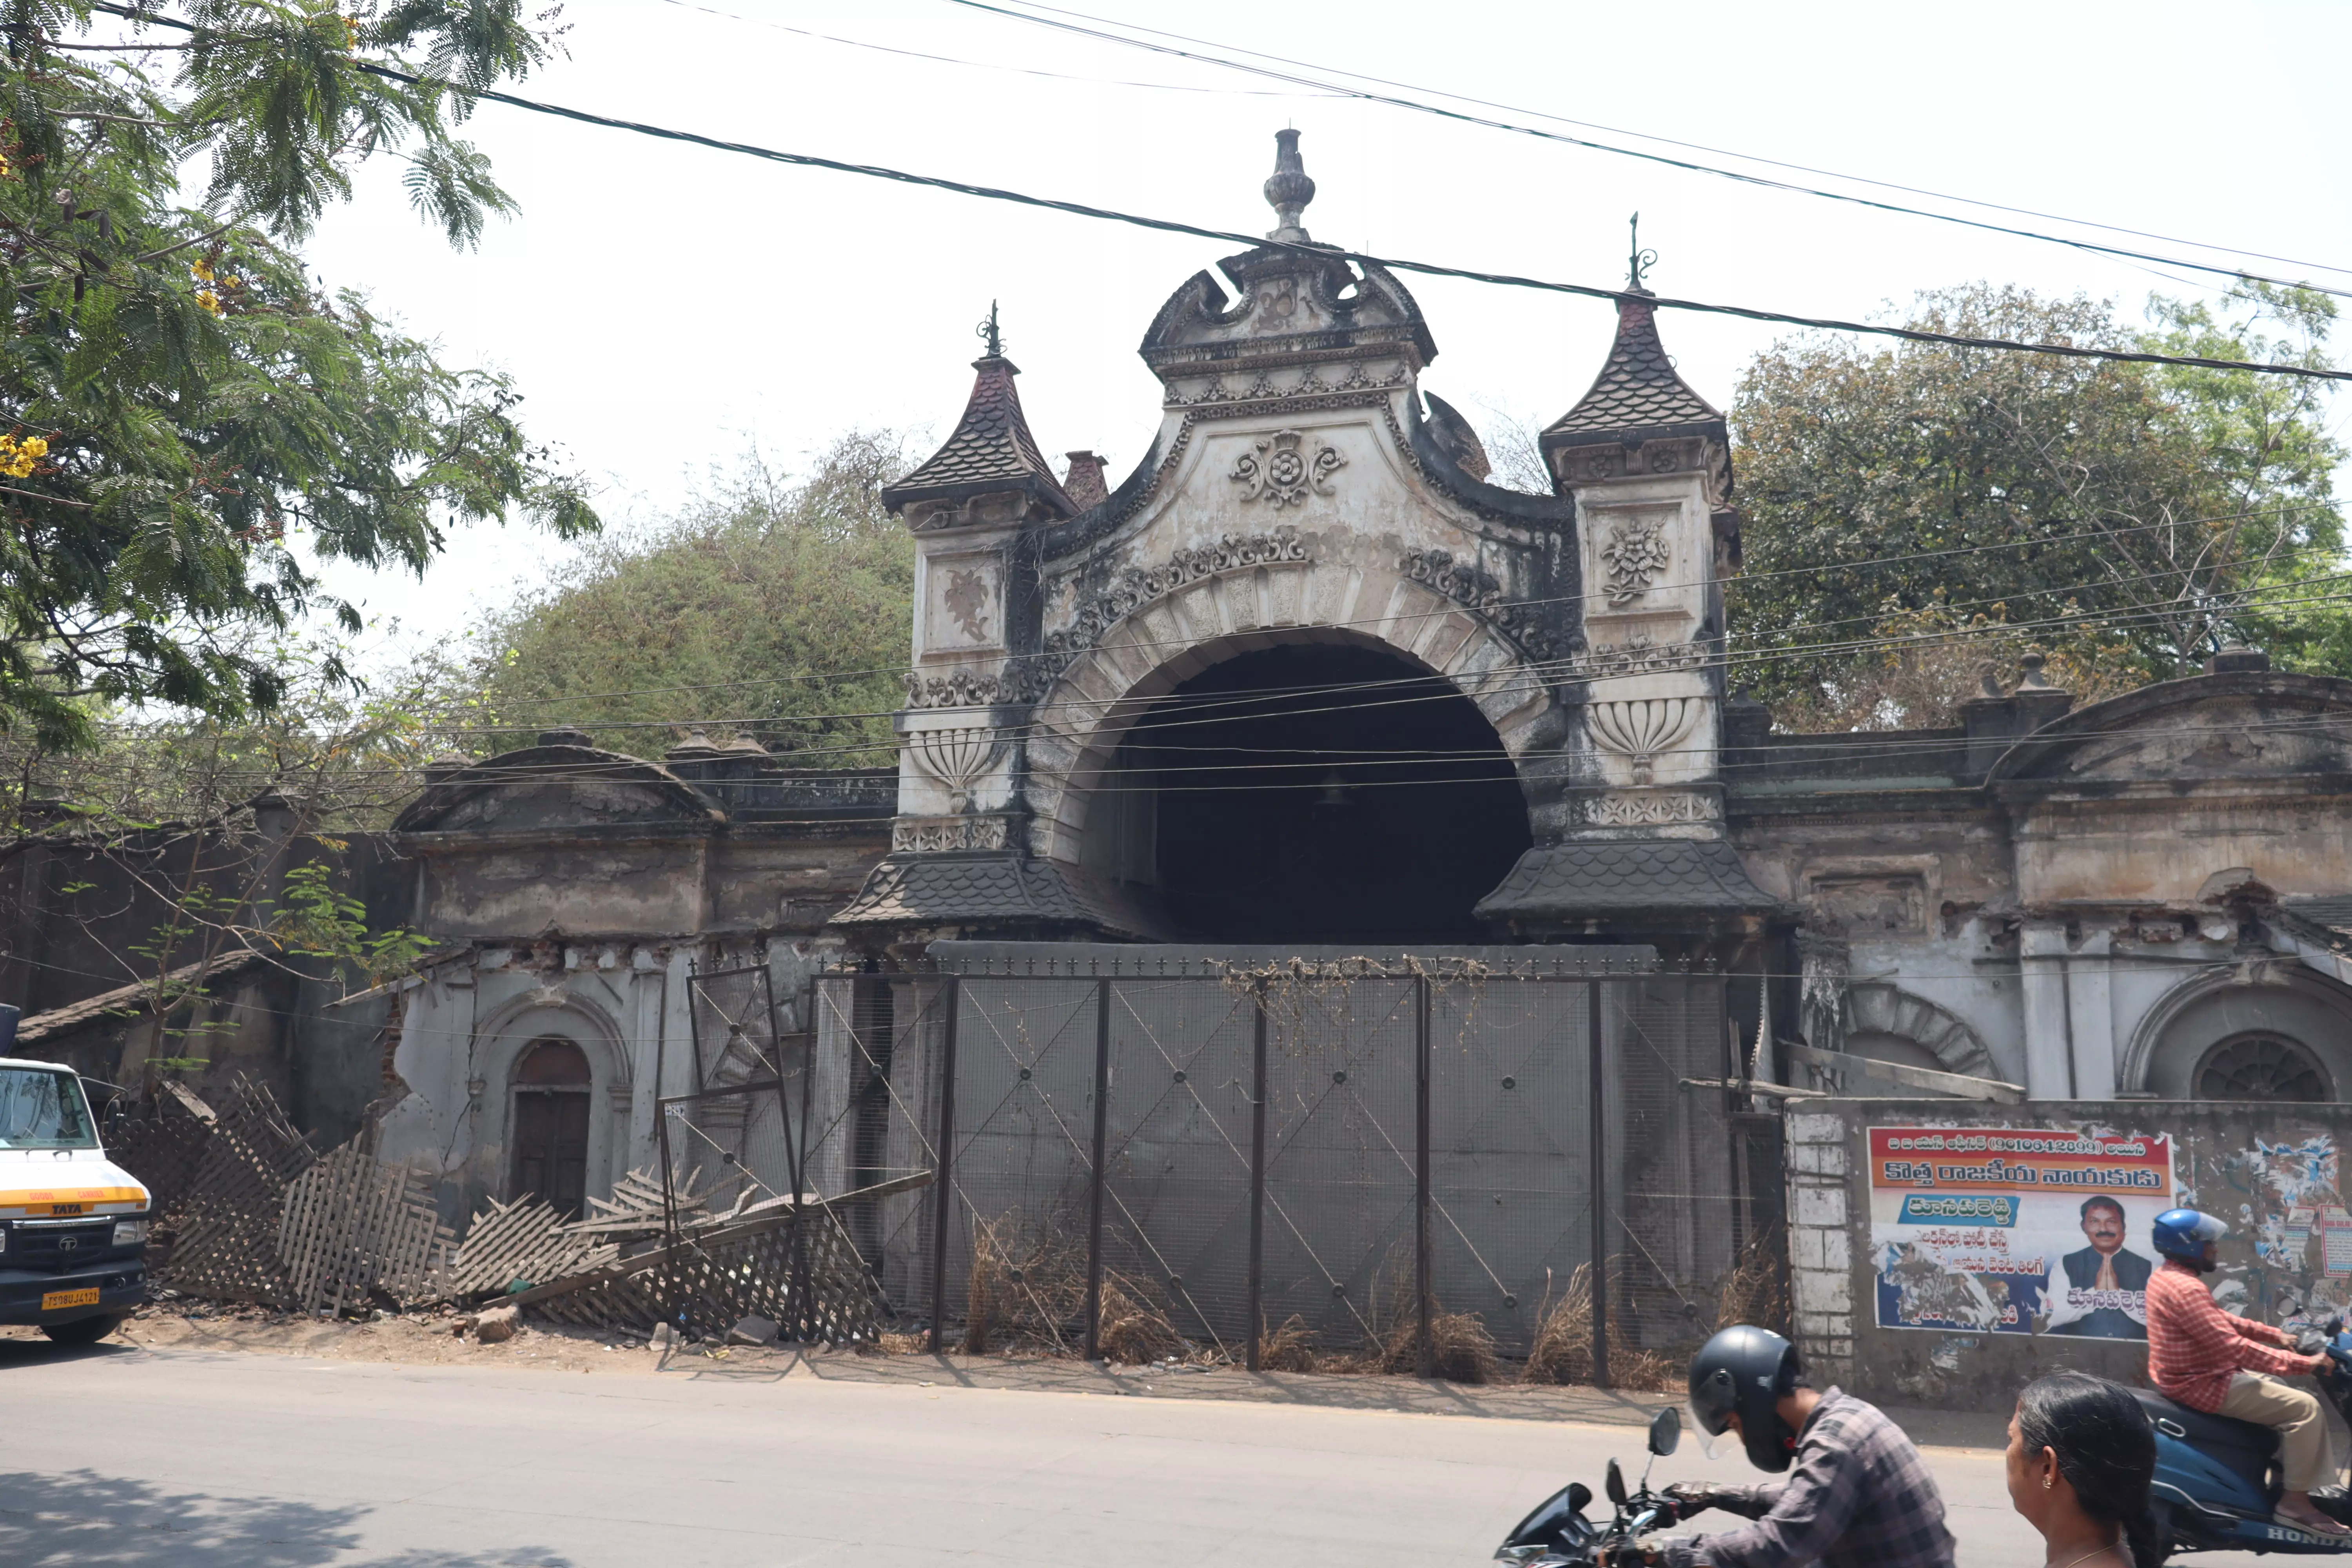 King Kothi Palace Neglected Over Legal Disputes